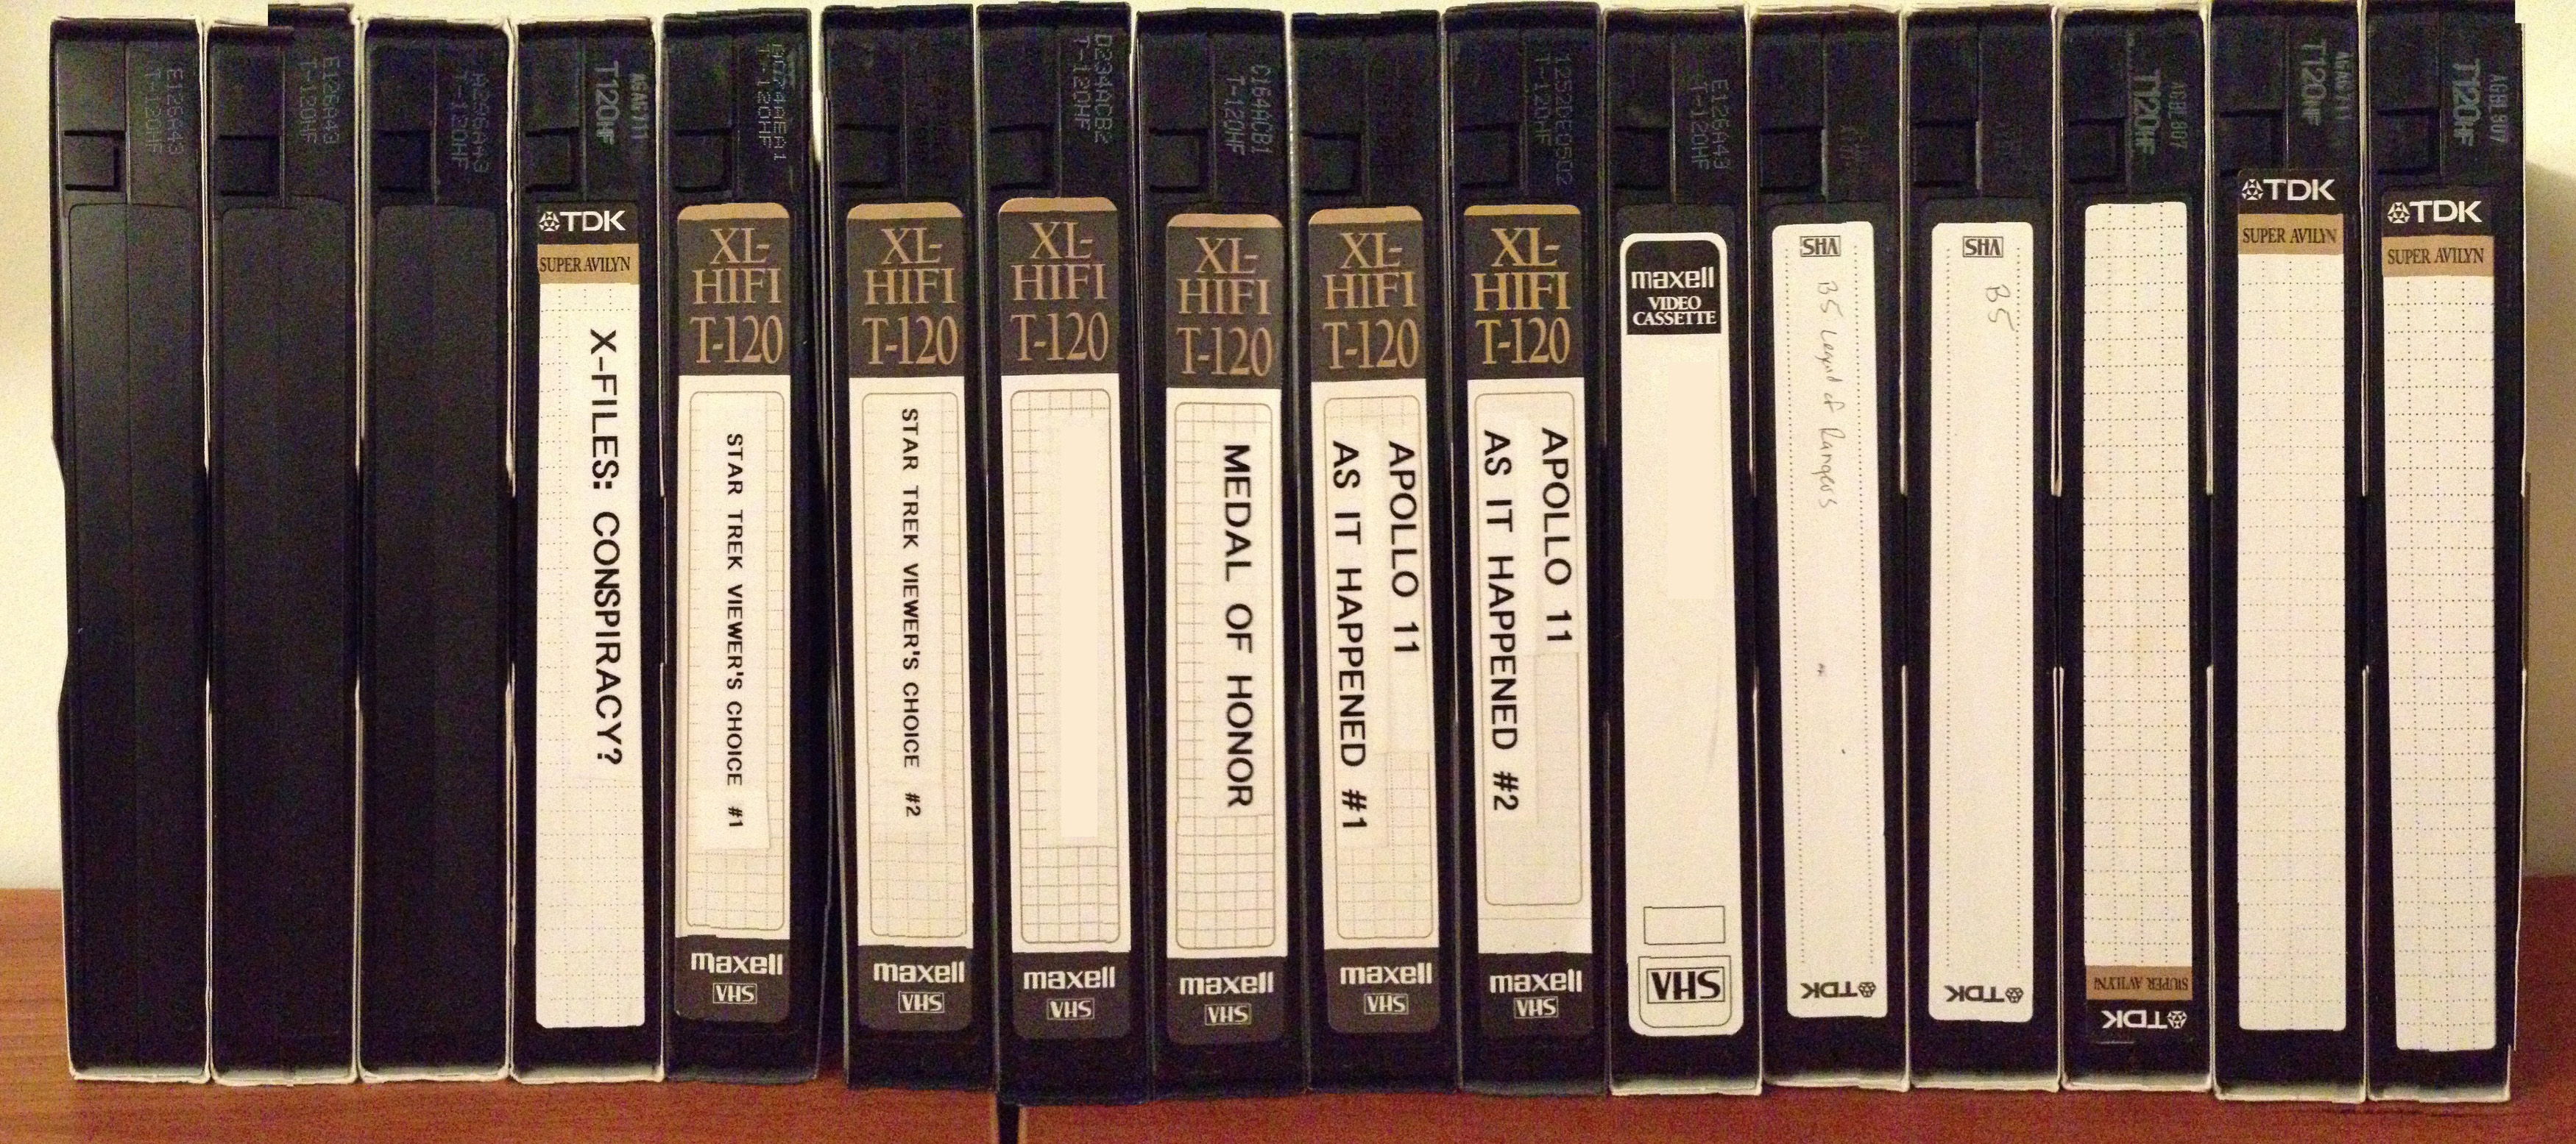 Brandon's VHS Tapes for TV Shows